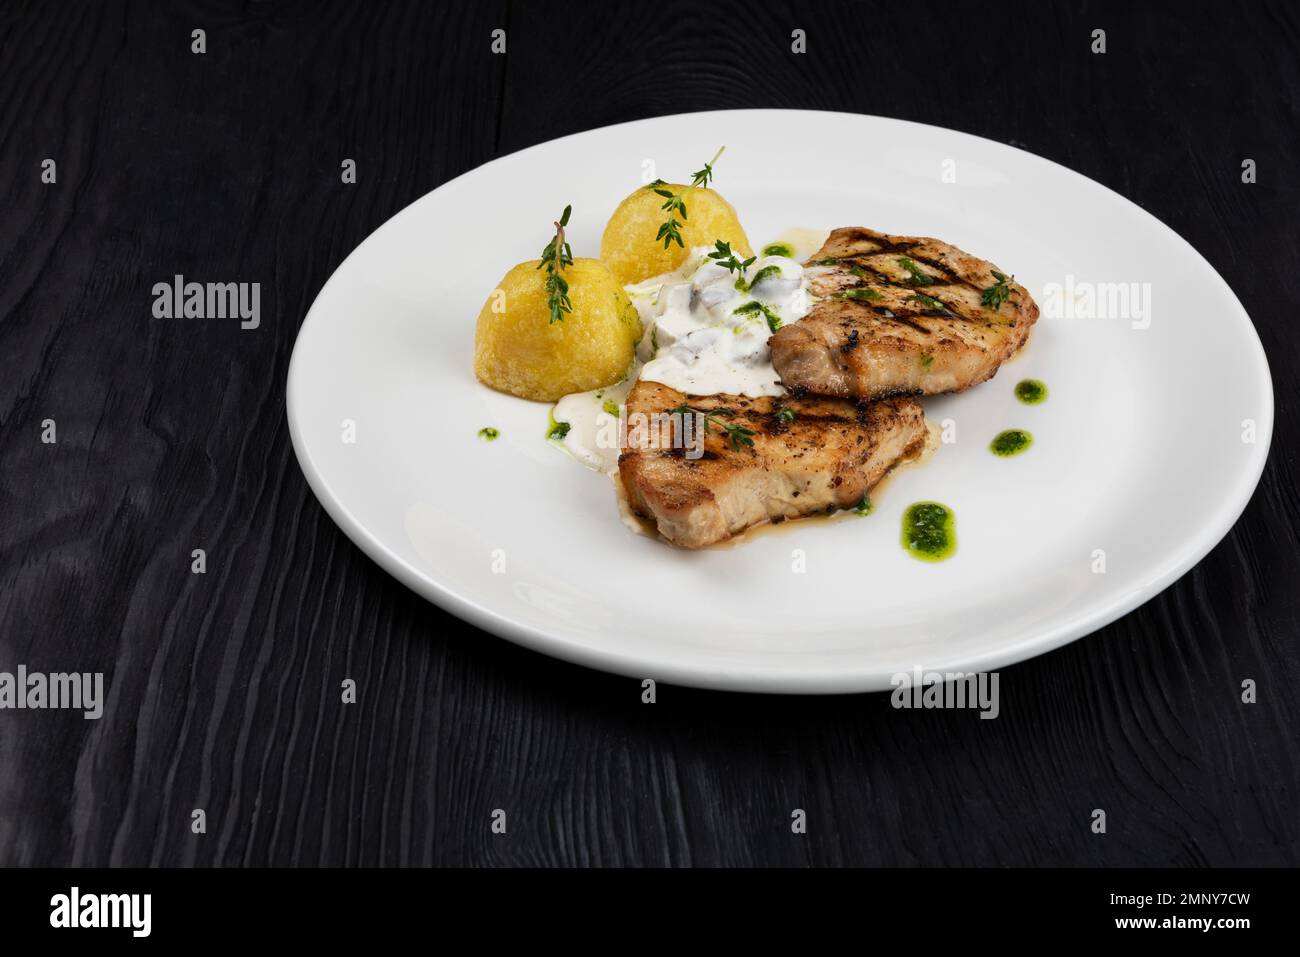 Grilled pork meat with mushroom sauce and potato on white plate on wooden black background Stock Photo